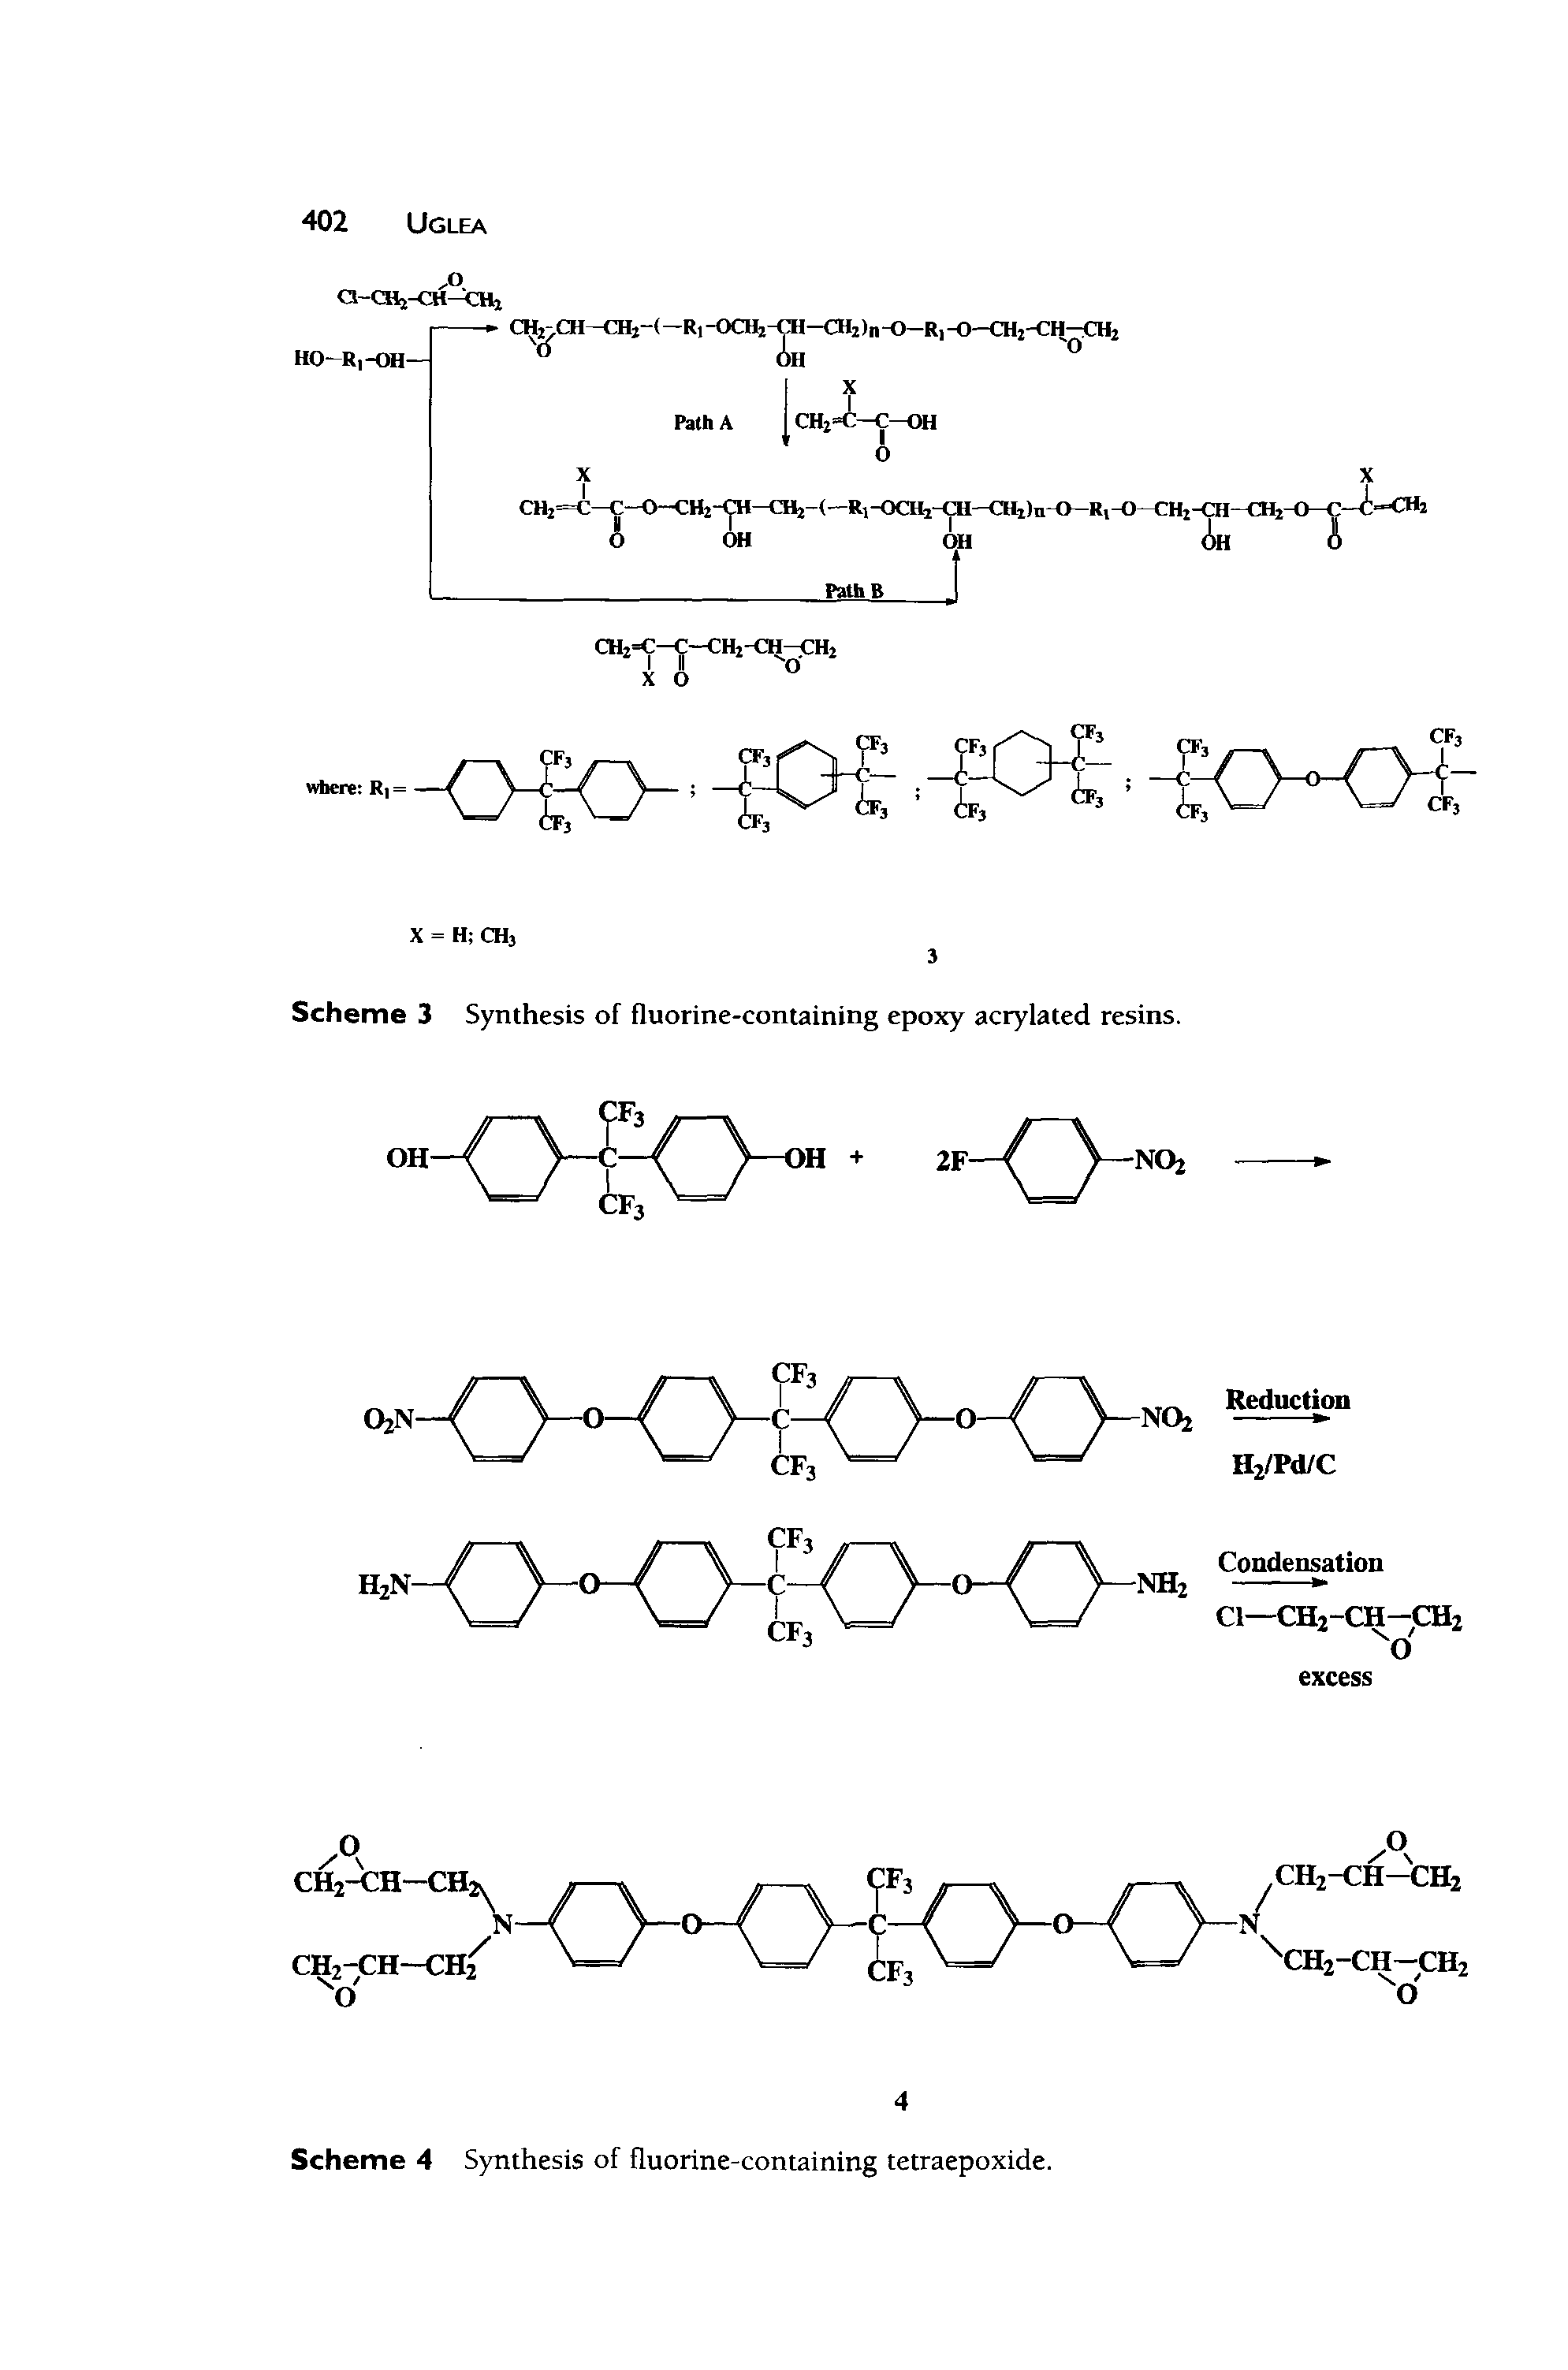 Scheme 3 Synthesis of fluorine-containing epoxy acrylated resins.